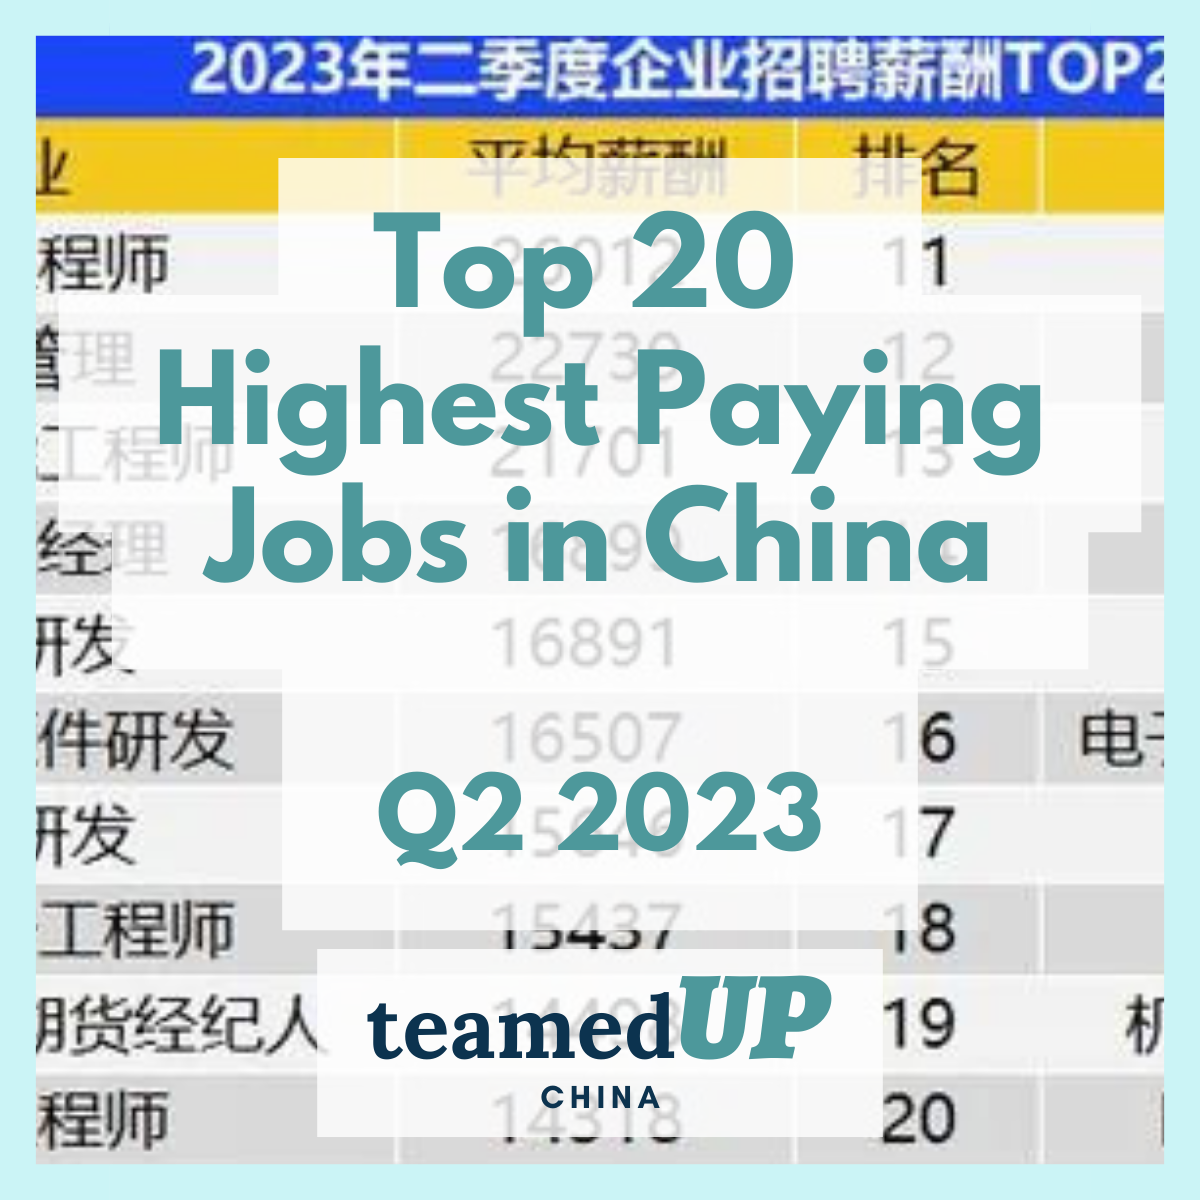 Highest Paying Jobs In China